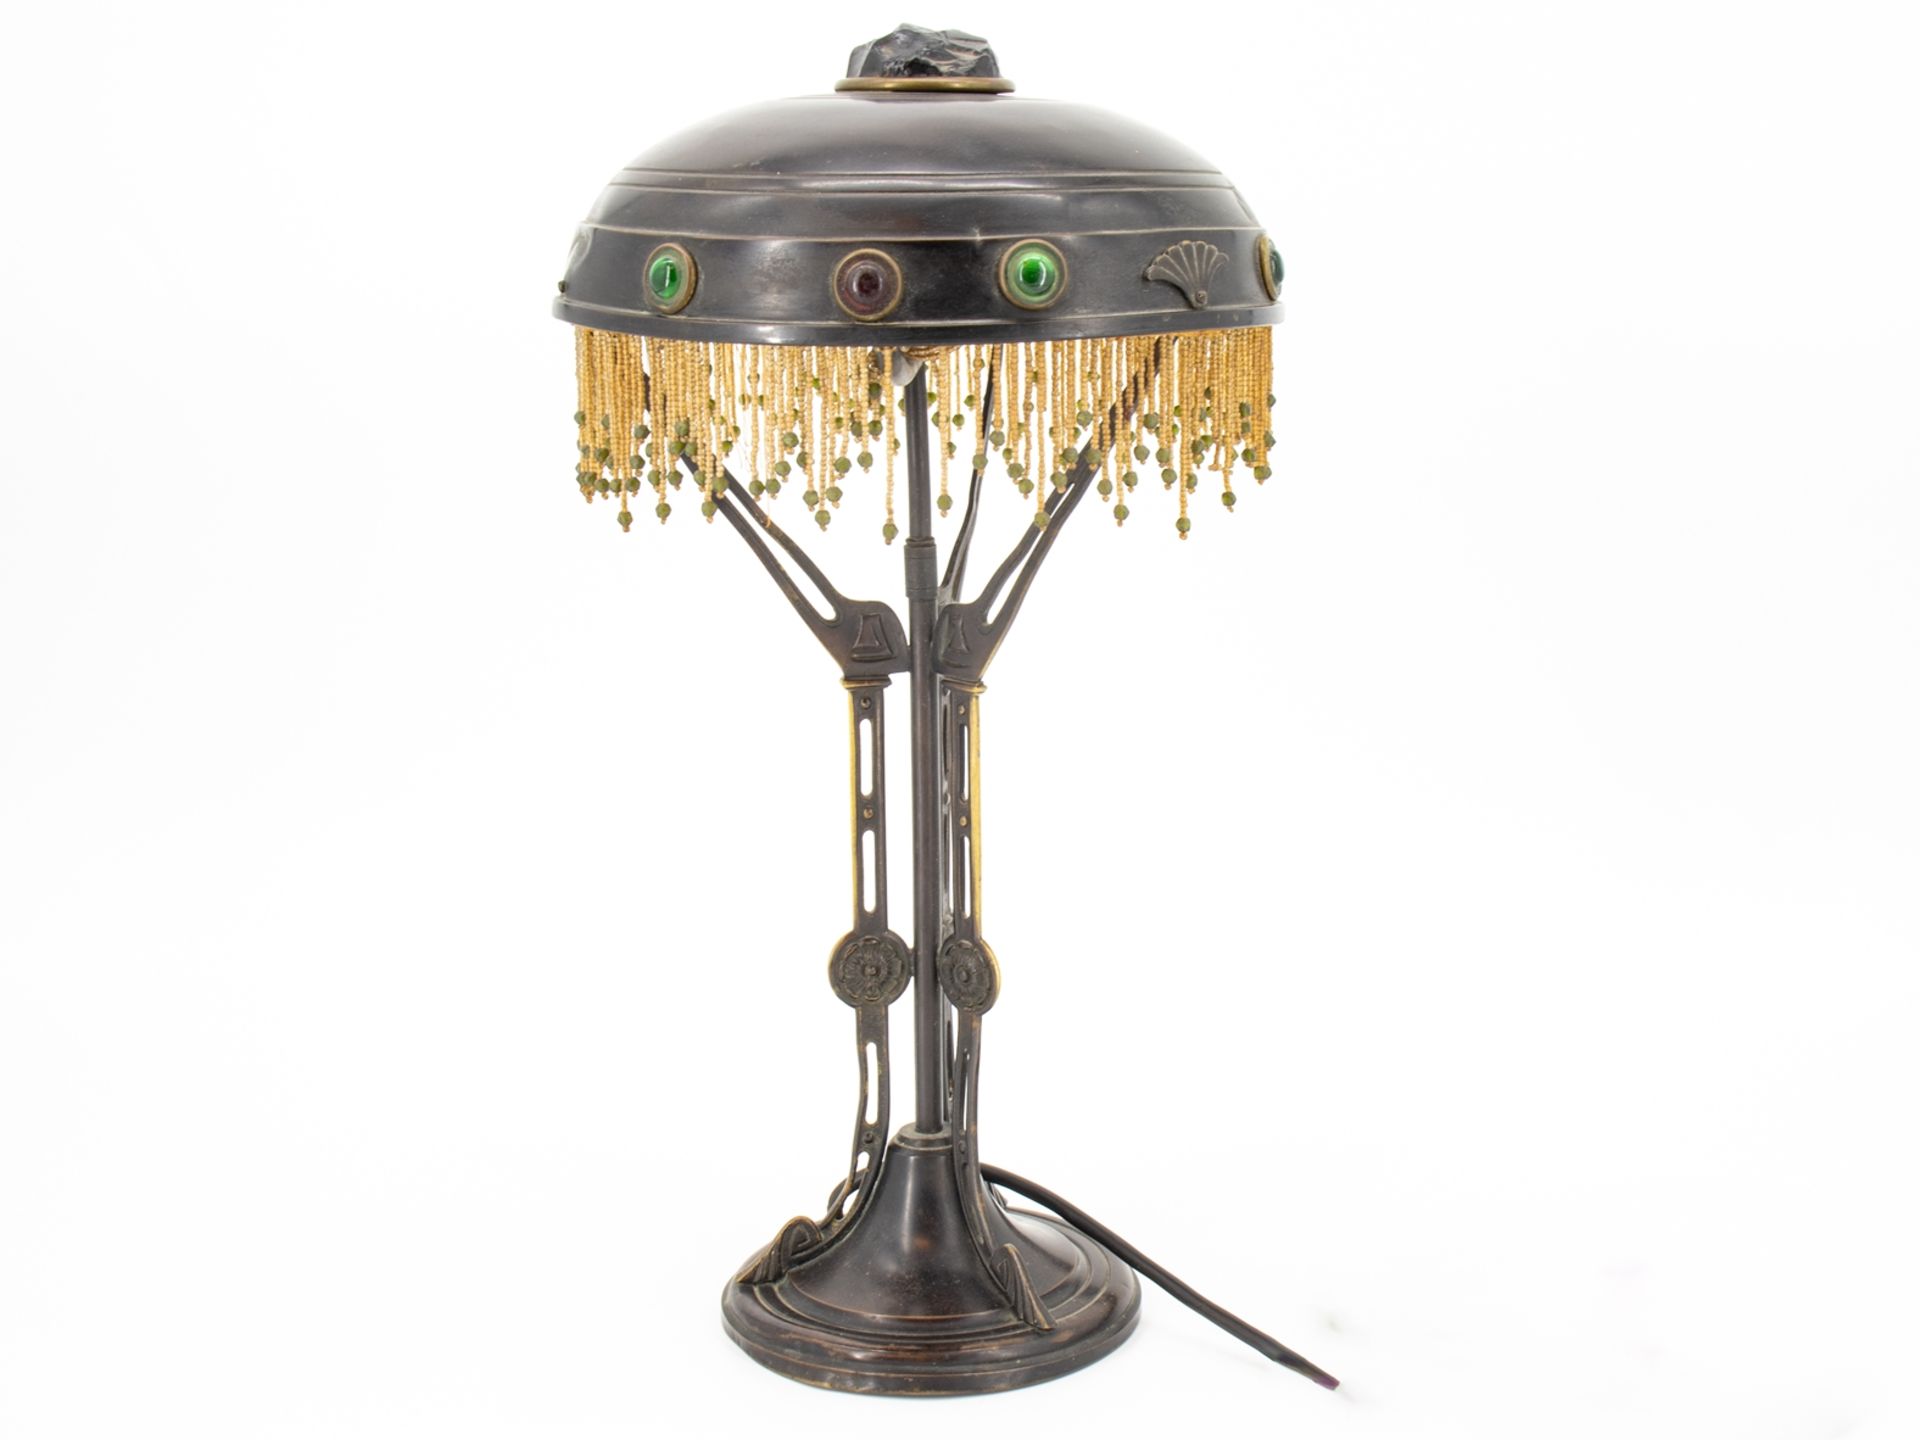 Art Nouveau table lamp with coloured stones, c. 1920 - Image 6 of 6